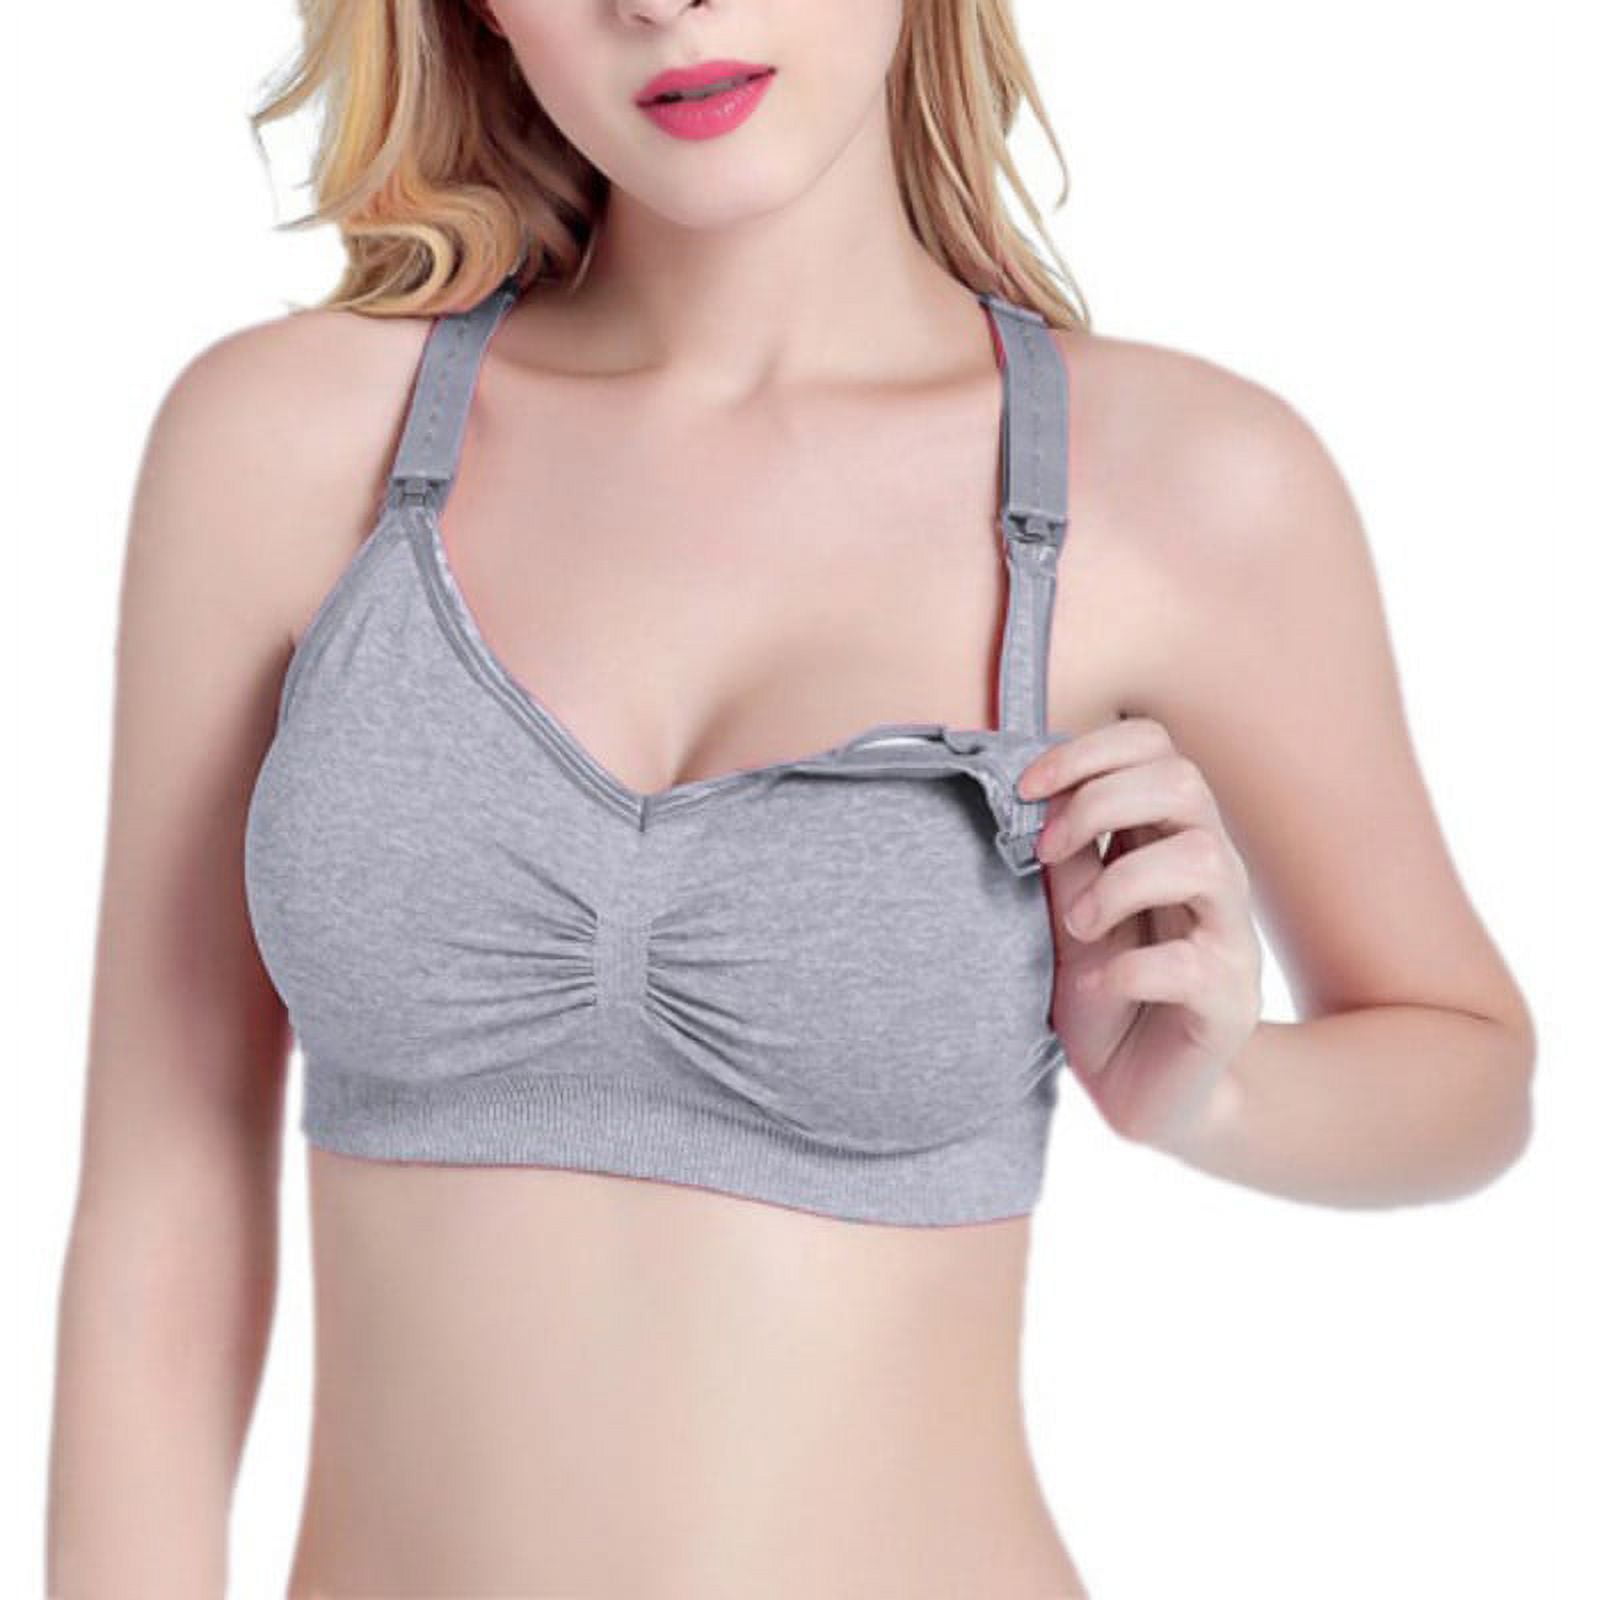 Most moms don't wear the right size nursing bra. Call us for help with your  nursing bra size at ***-***-****. Did you know…